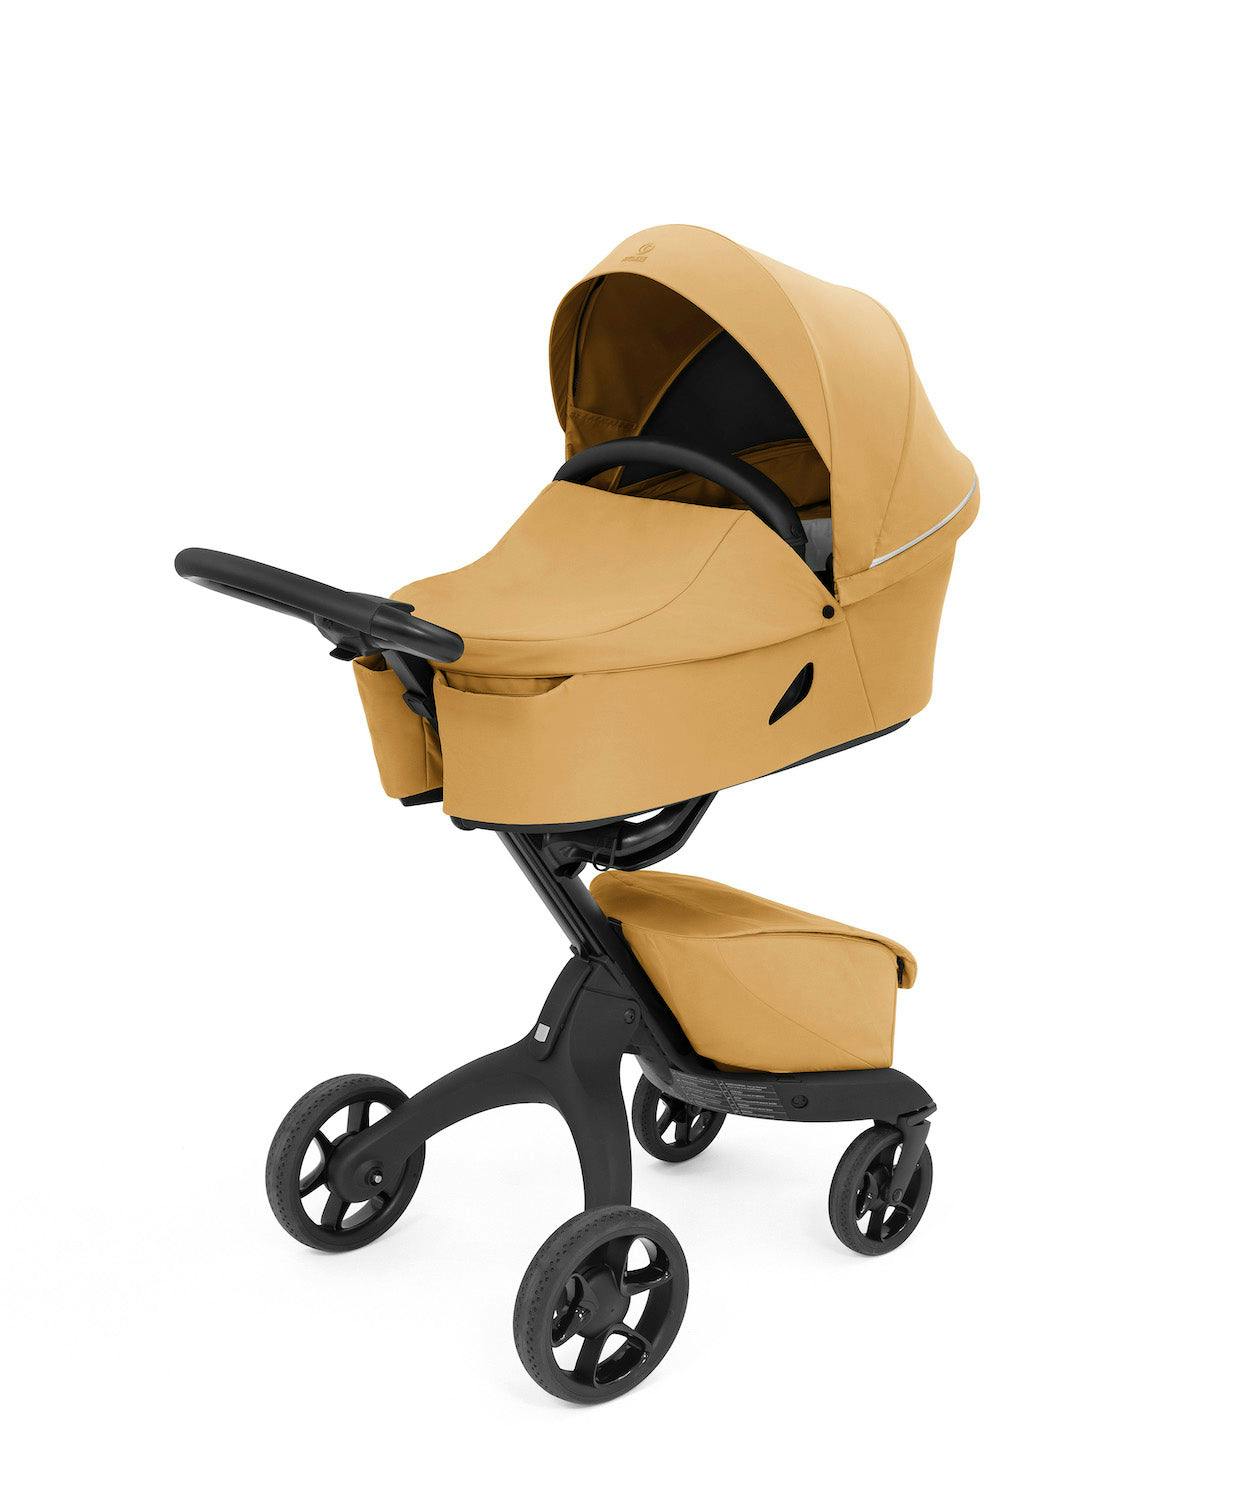 Stokke Xplory X Stroller Carry Cot Golden Yellow